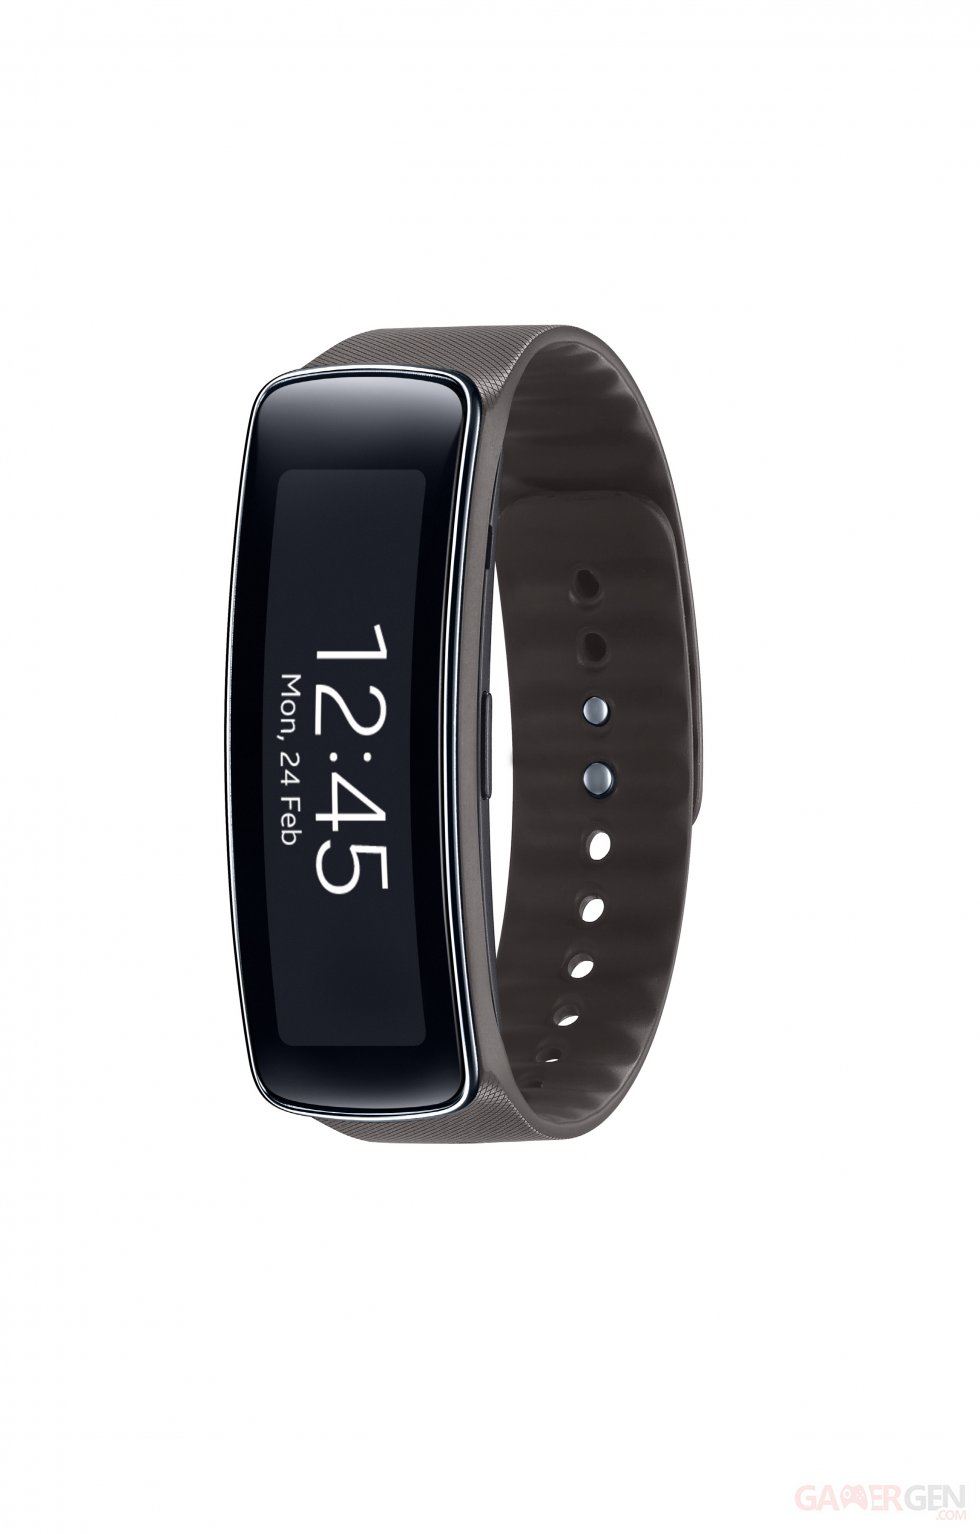 Samsung-Gear-Fit_25-02-2014_pic (17)